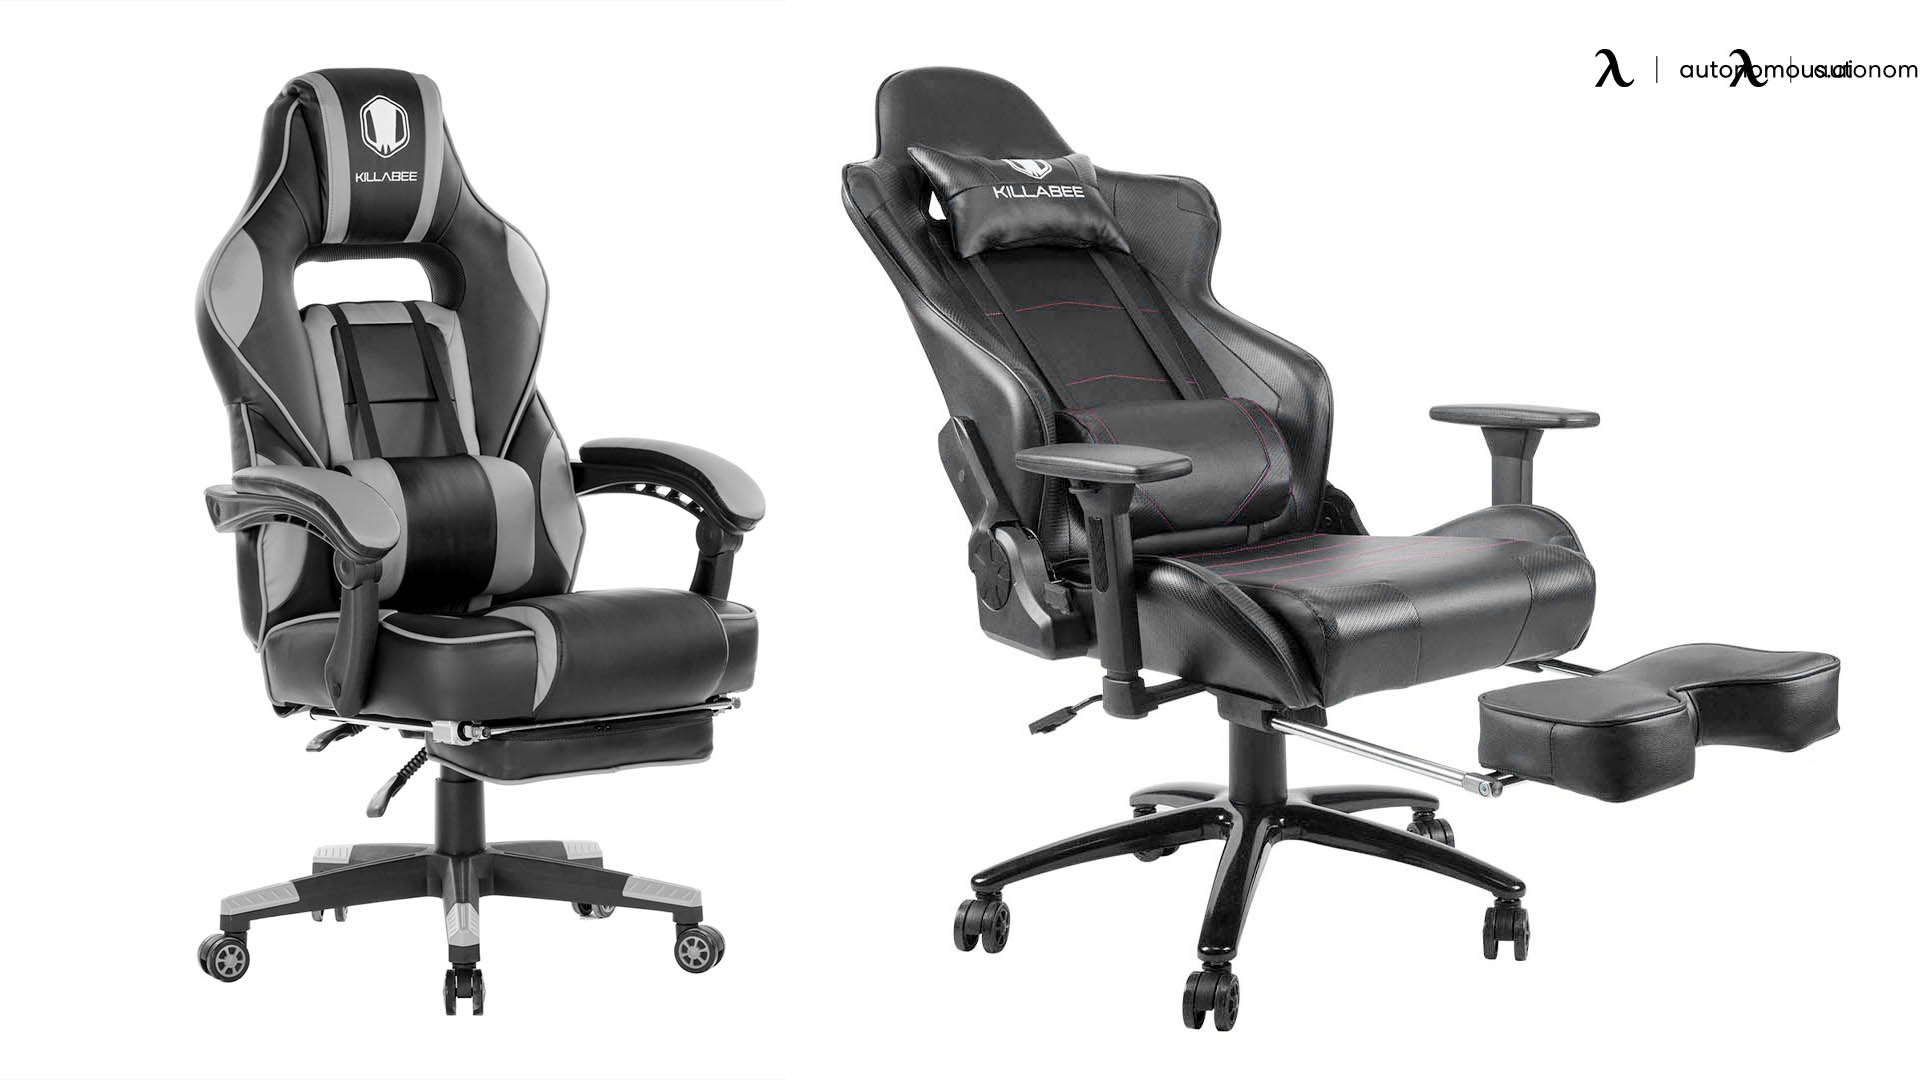 The Ideal Office Chair for Leg Circulation – 10 Best Picks